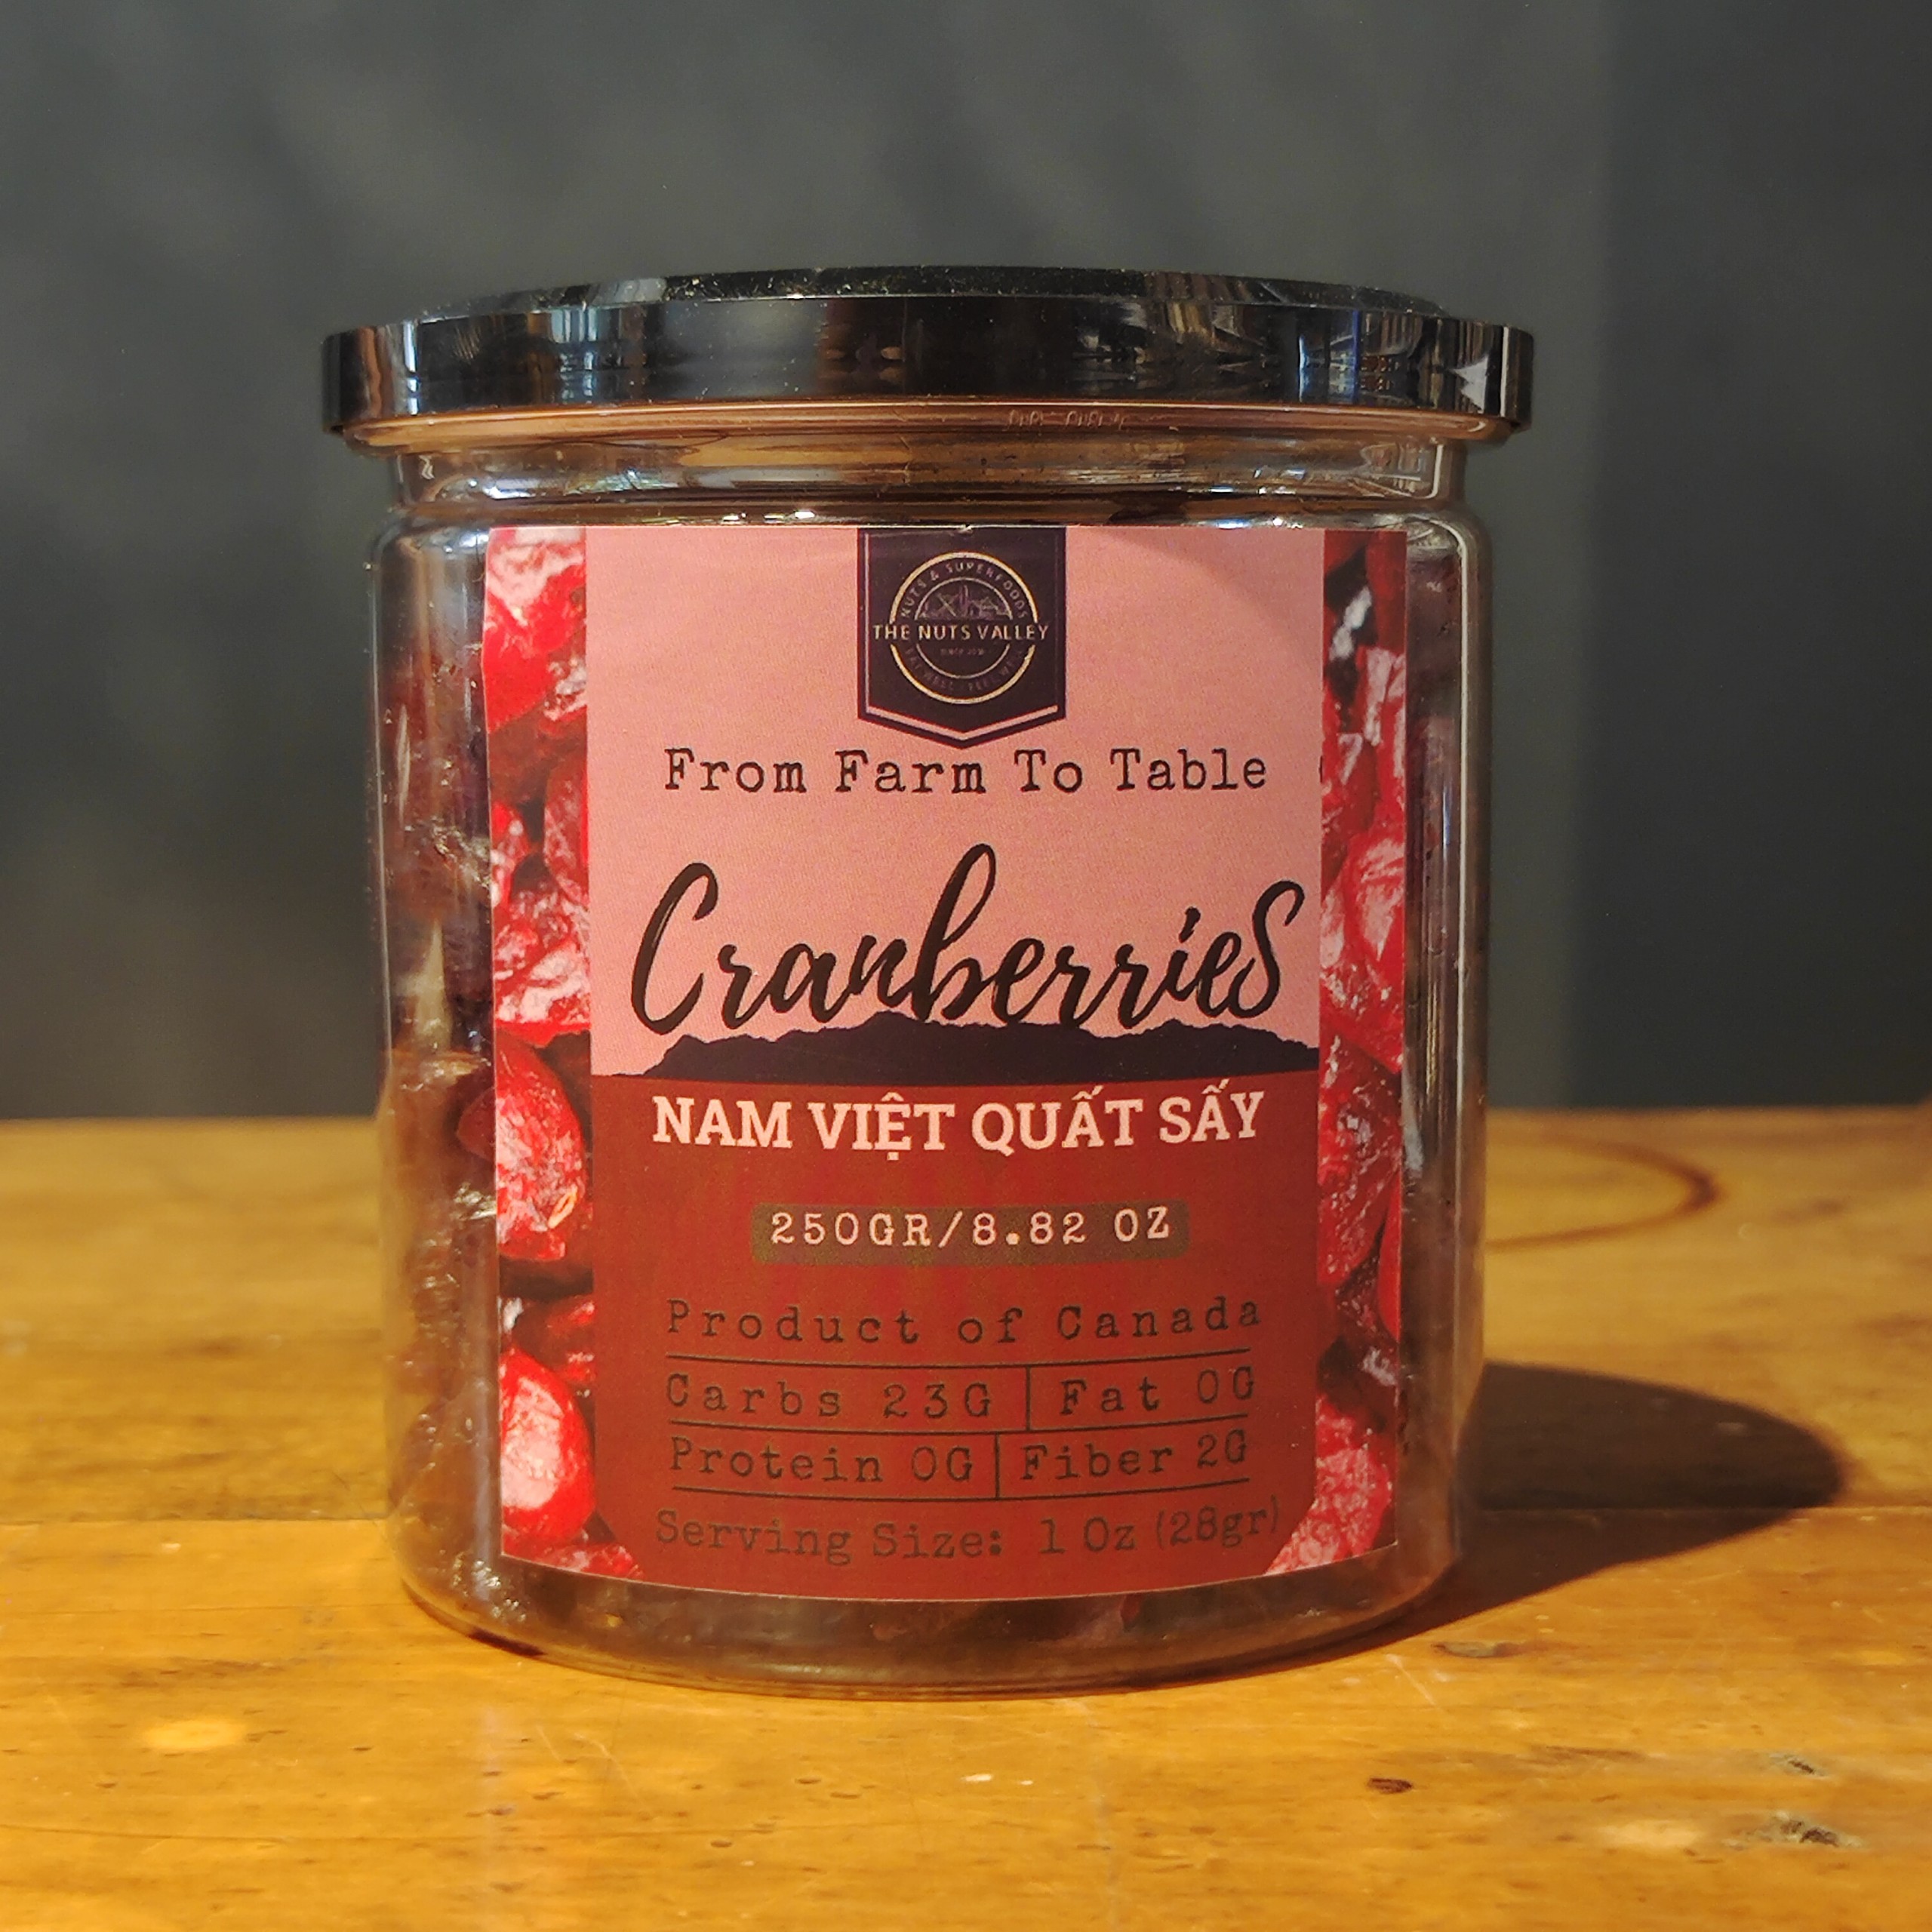 Nam việt quất sấy - Cranberry The Nuts Valley 250g